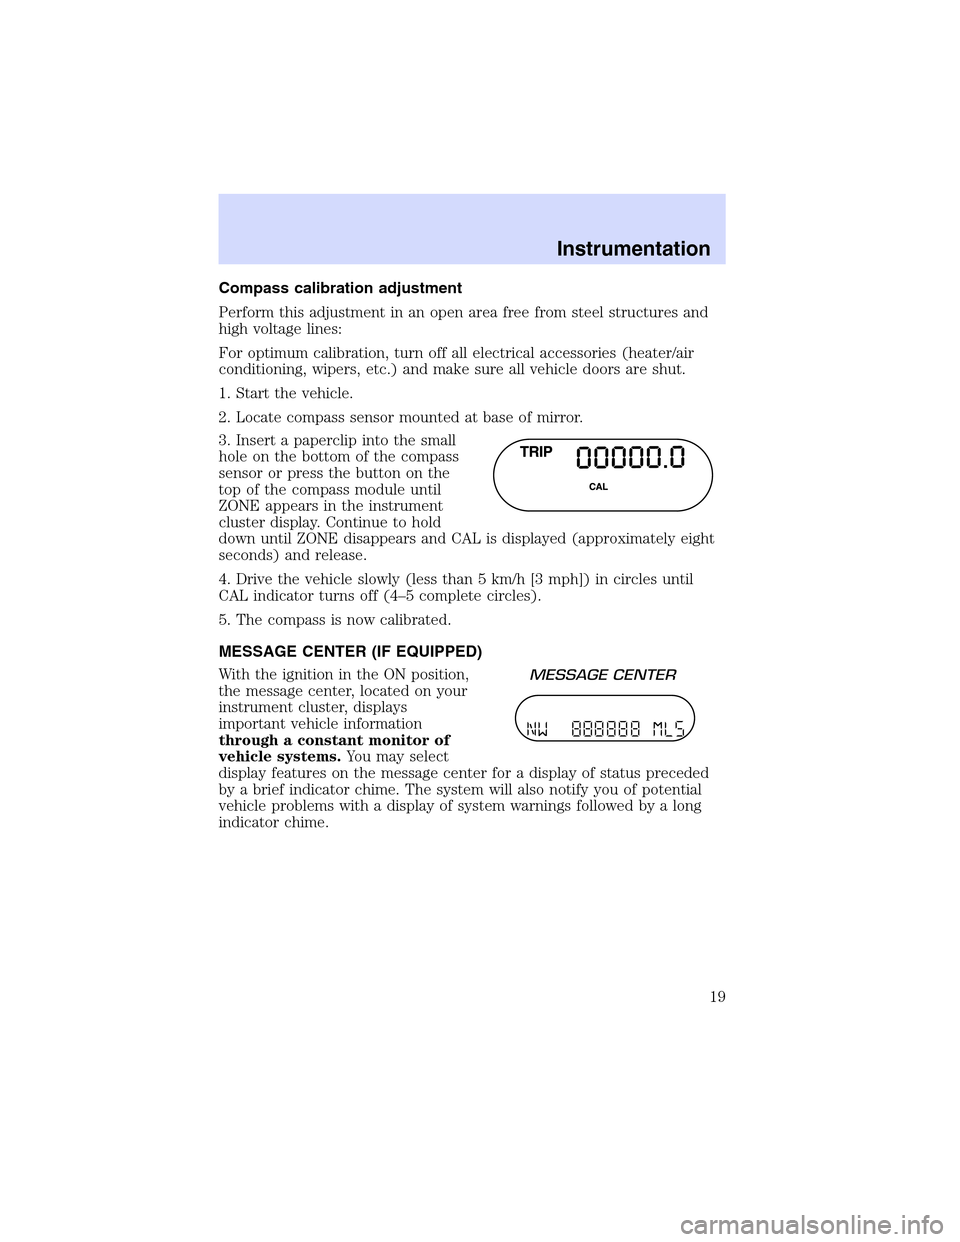 Mercury Mountaineer 2002  Owners Manuals Compasscalibrationadjustment
Perform this adjustment in an open area free from steel structures and
high voltage lines:
For optimum calibration, turn off all electrical accessories (heater/air
conditi